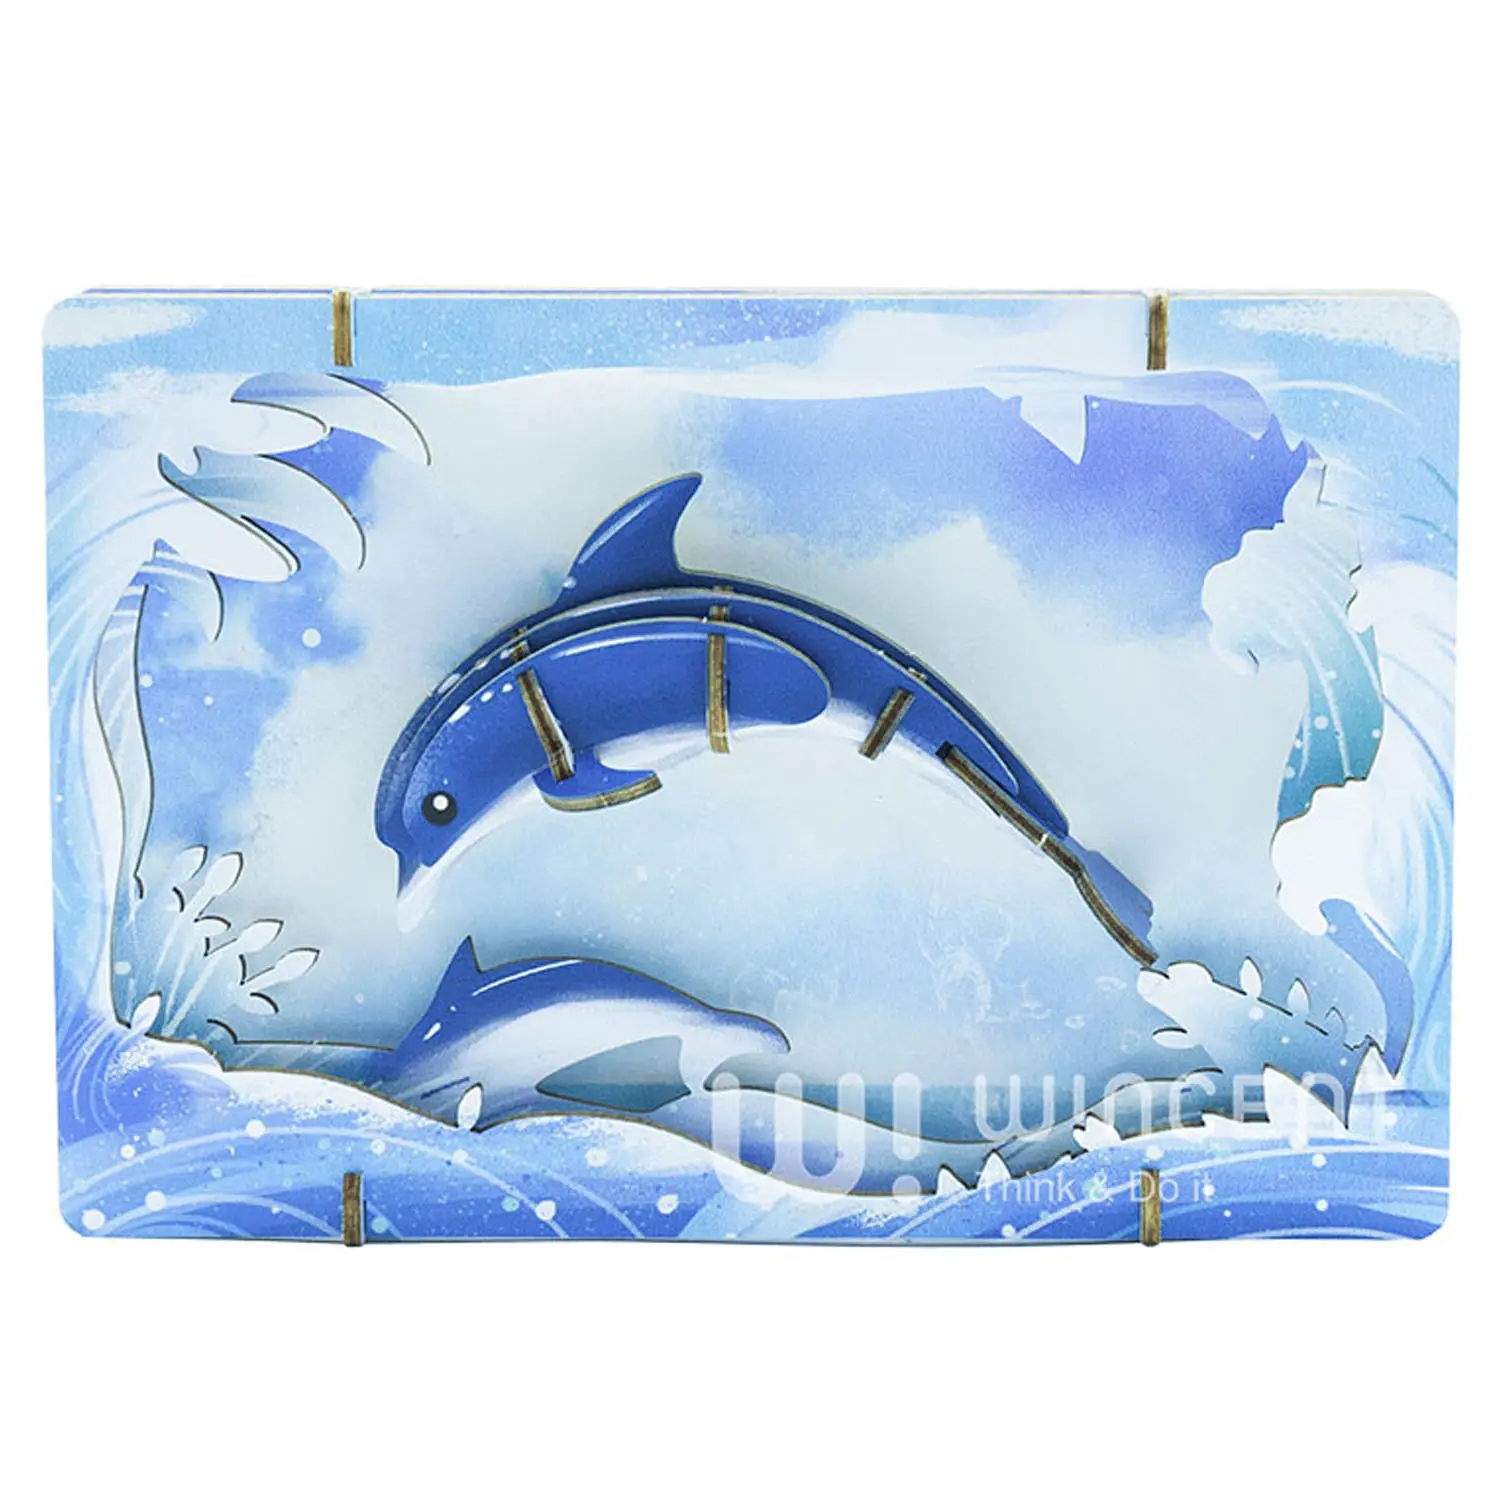 Wincent Theater Puzzle Marine Animal New Birthday Gift Idea 3D Puzzle Kids Wooden DIY Crafts